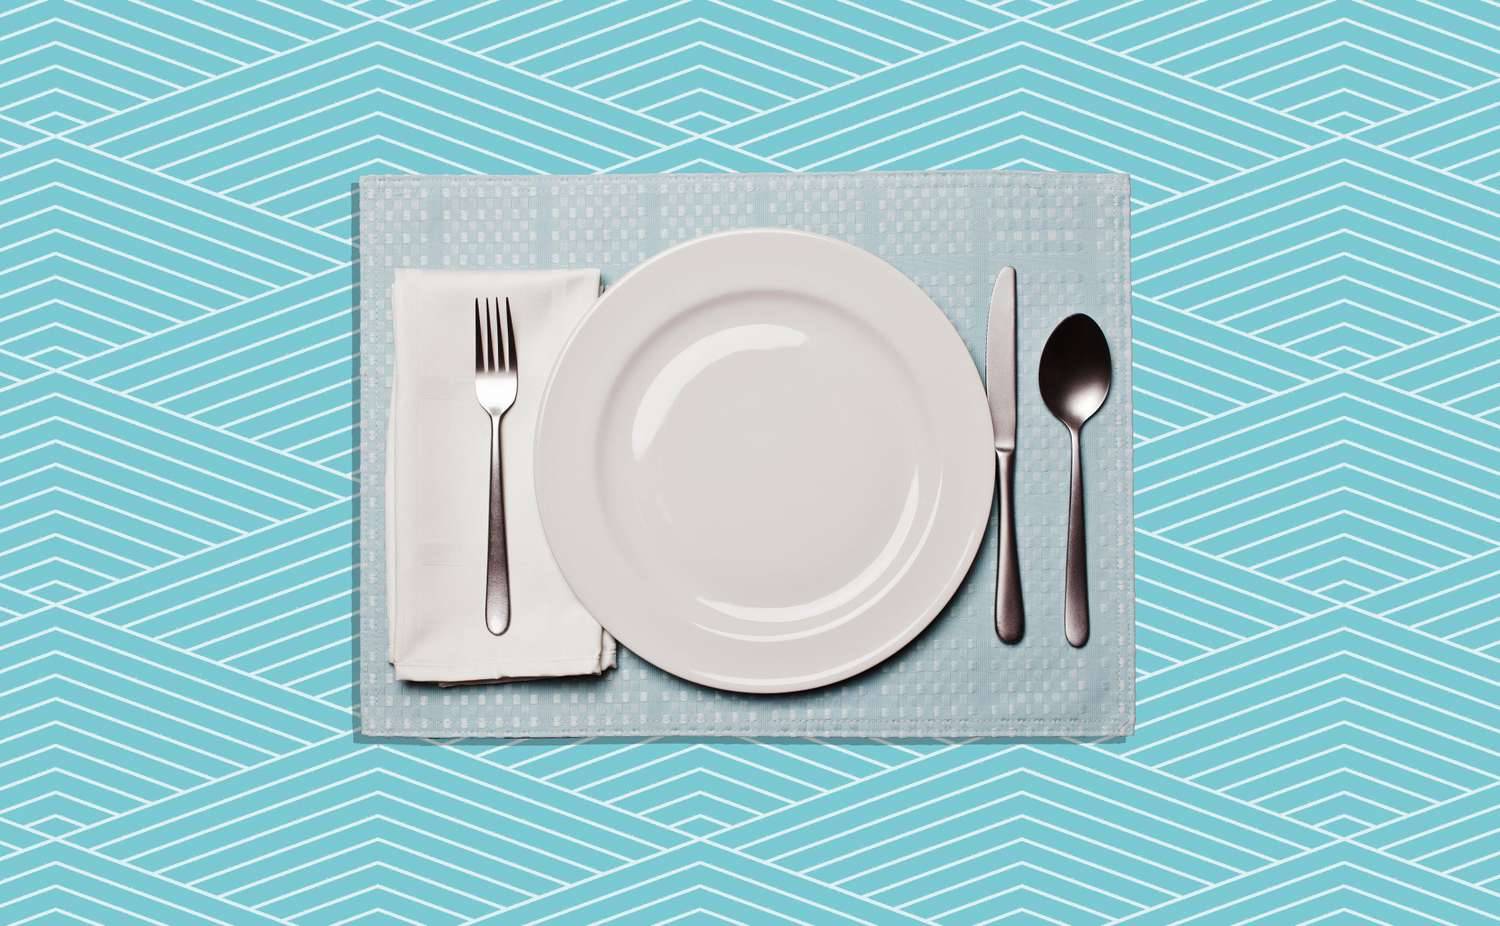 Formal Table Settings, How To Set Up A Dining Table For Dinner